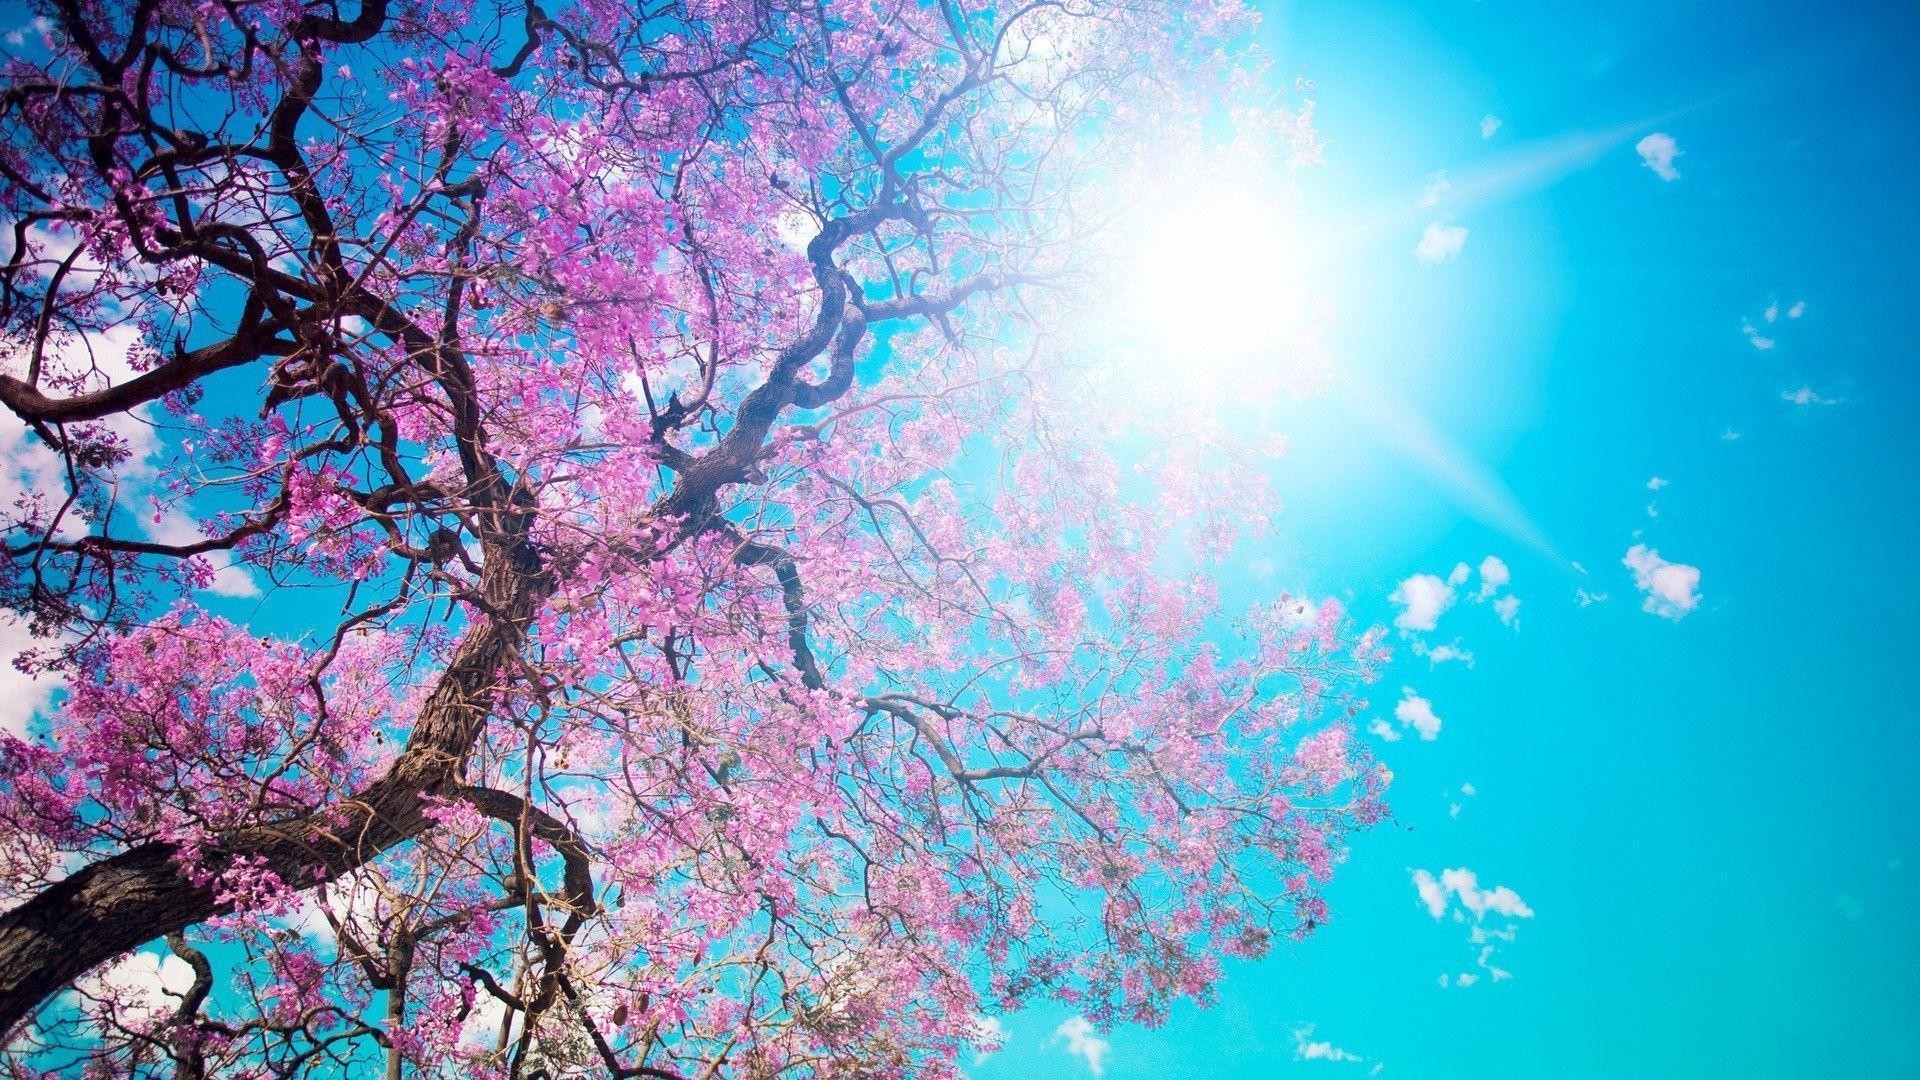 1920x1080 Cherry Blossom Tree Wallpaper Collection - HD Wallpapers